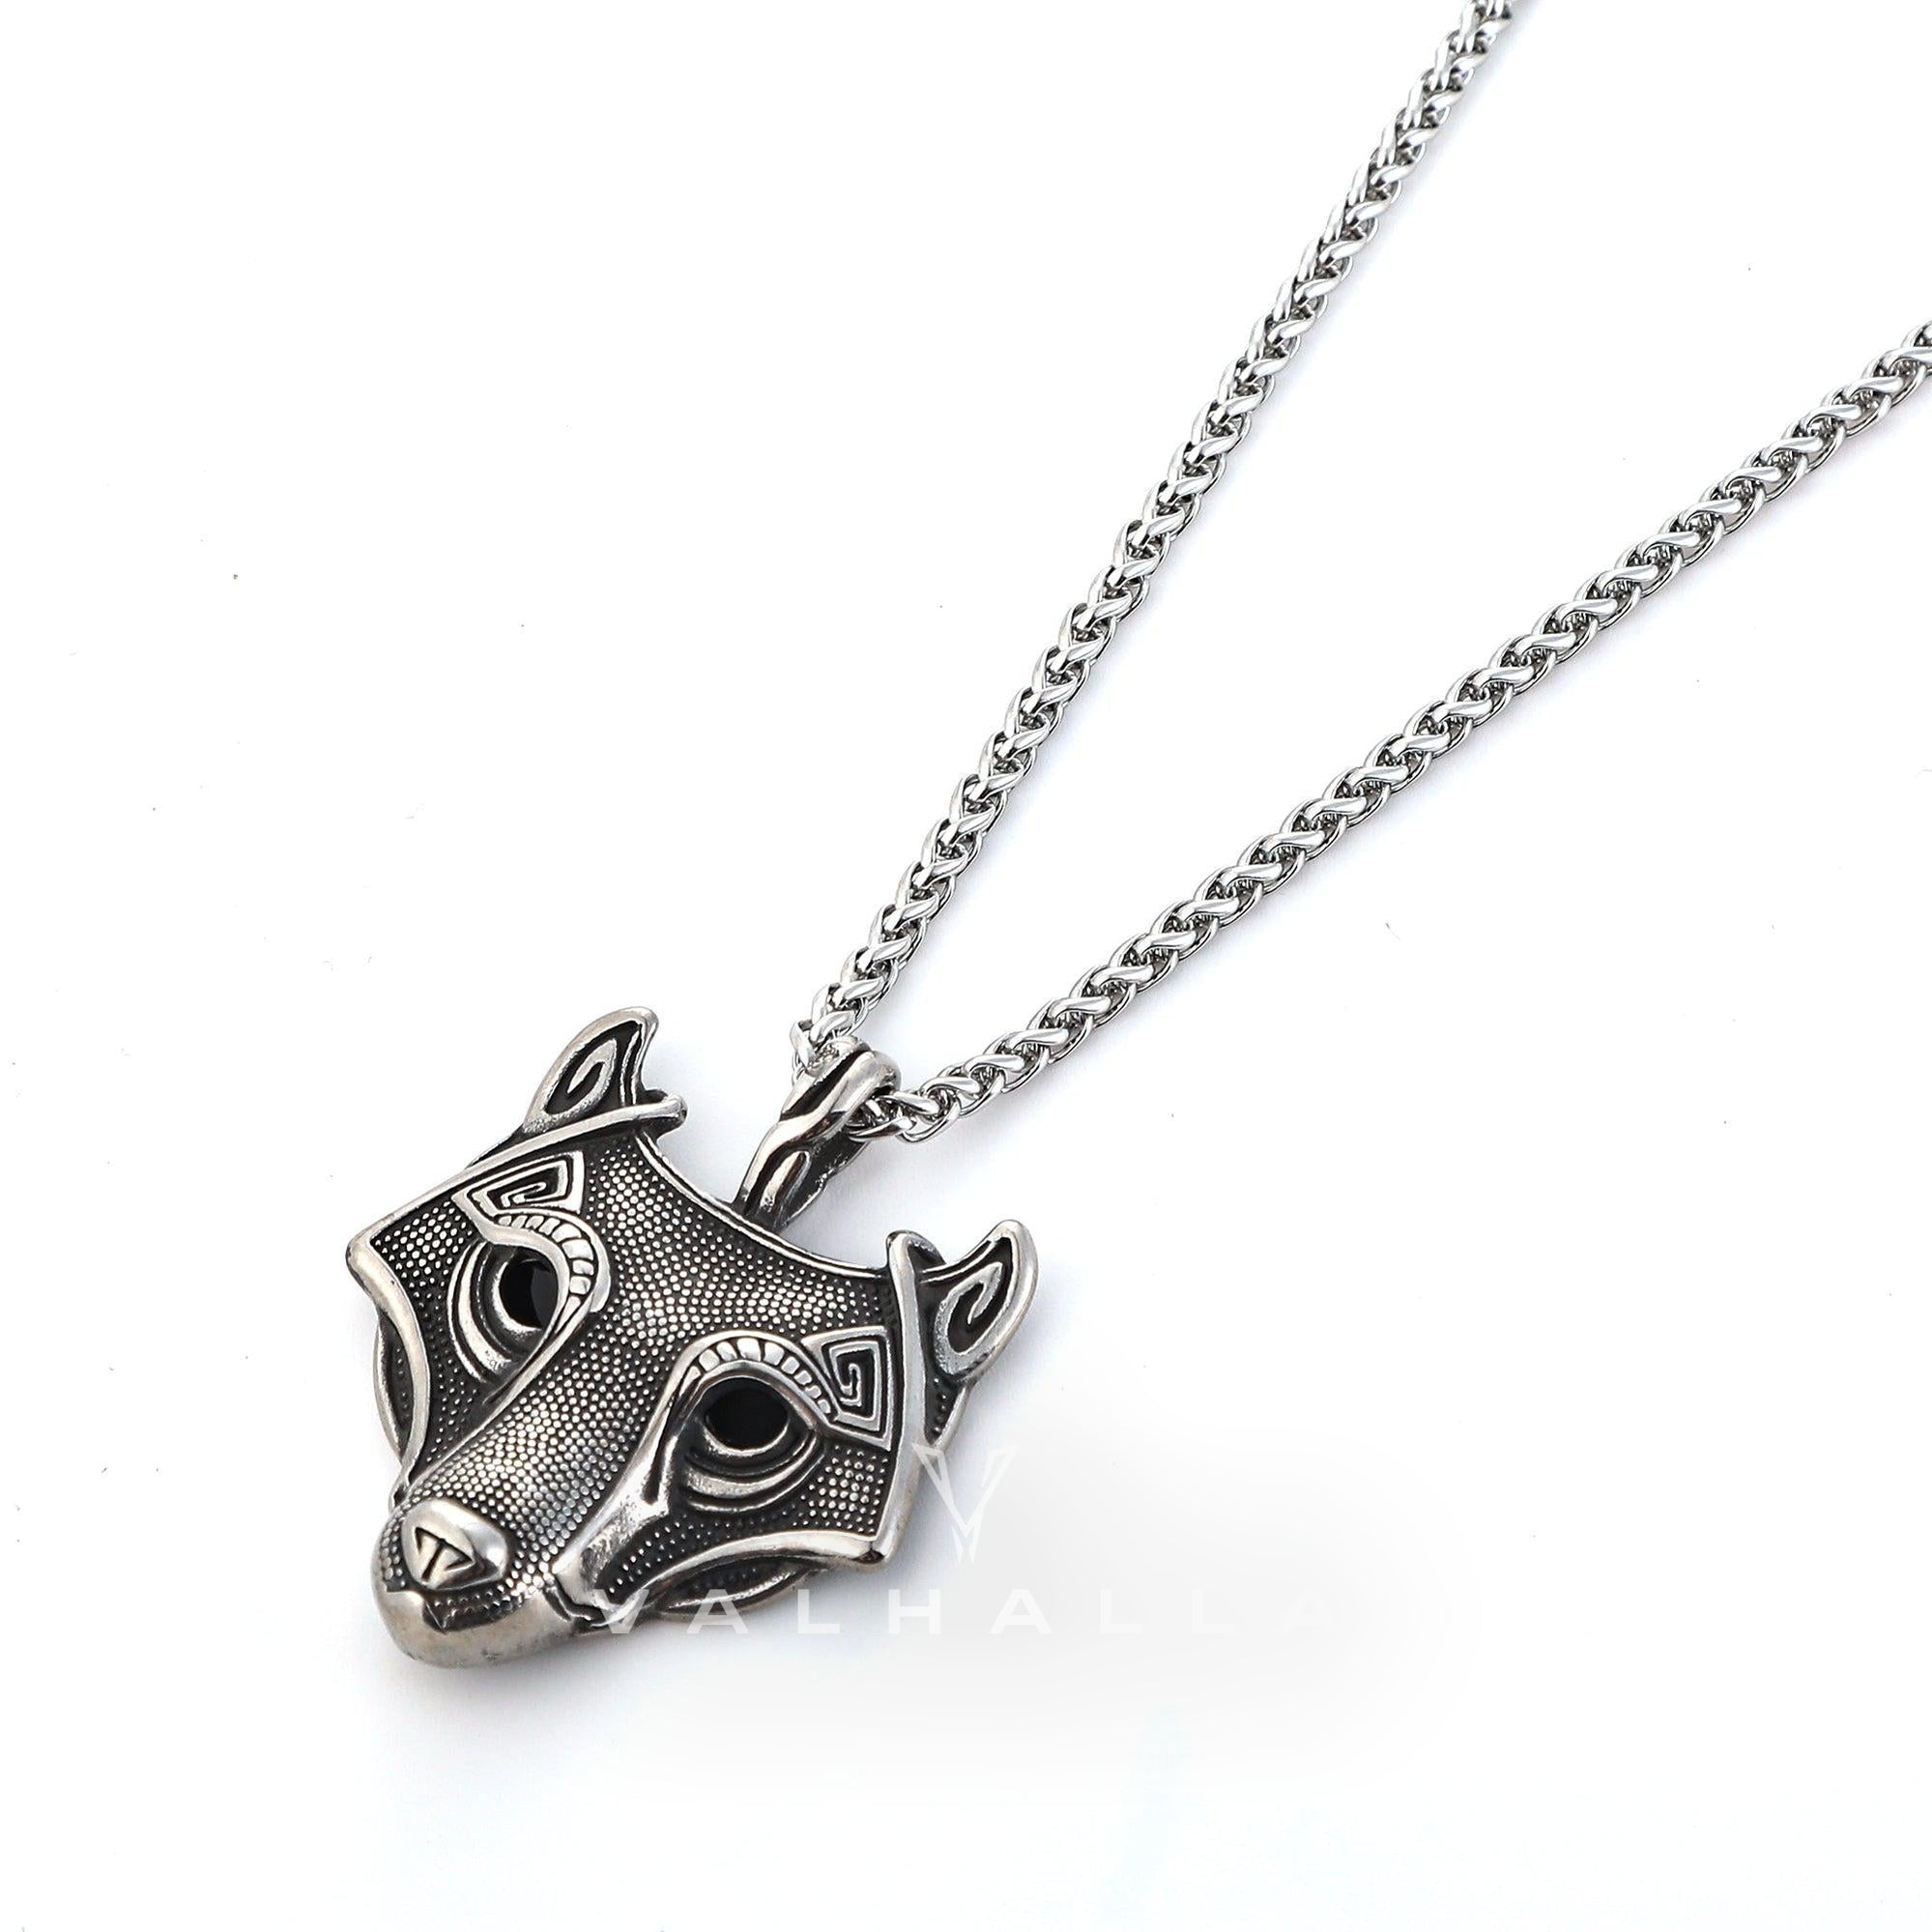 Handcrafted Stainless Steel Fenrir Pendant & Chain on Handcrafted Stainless Steel Chain